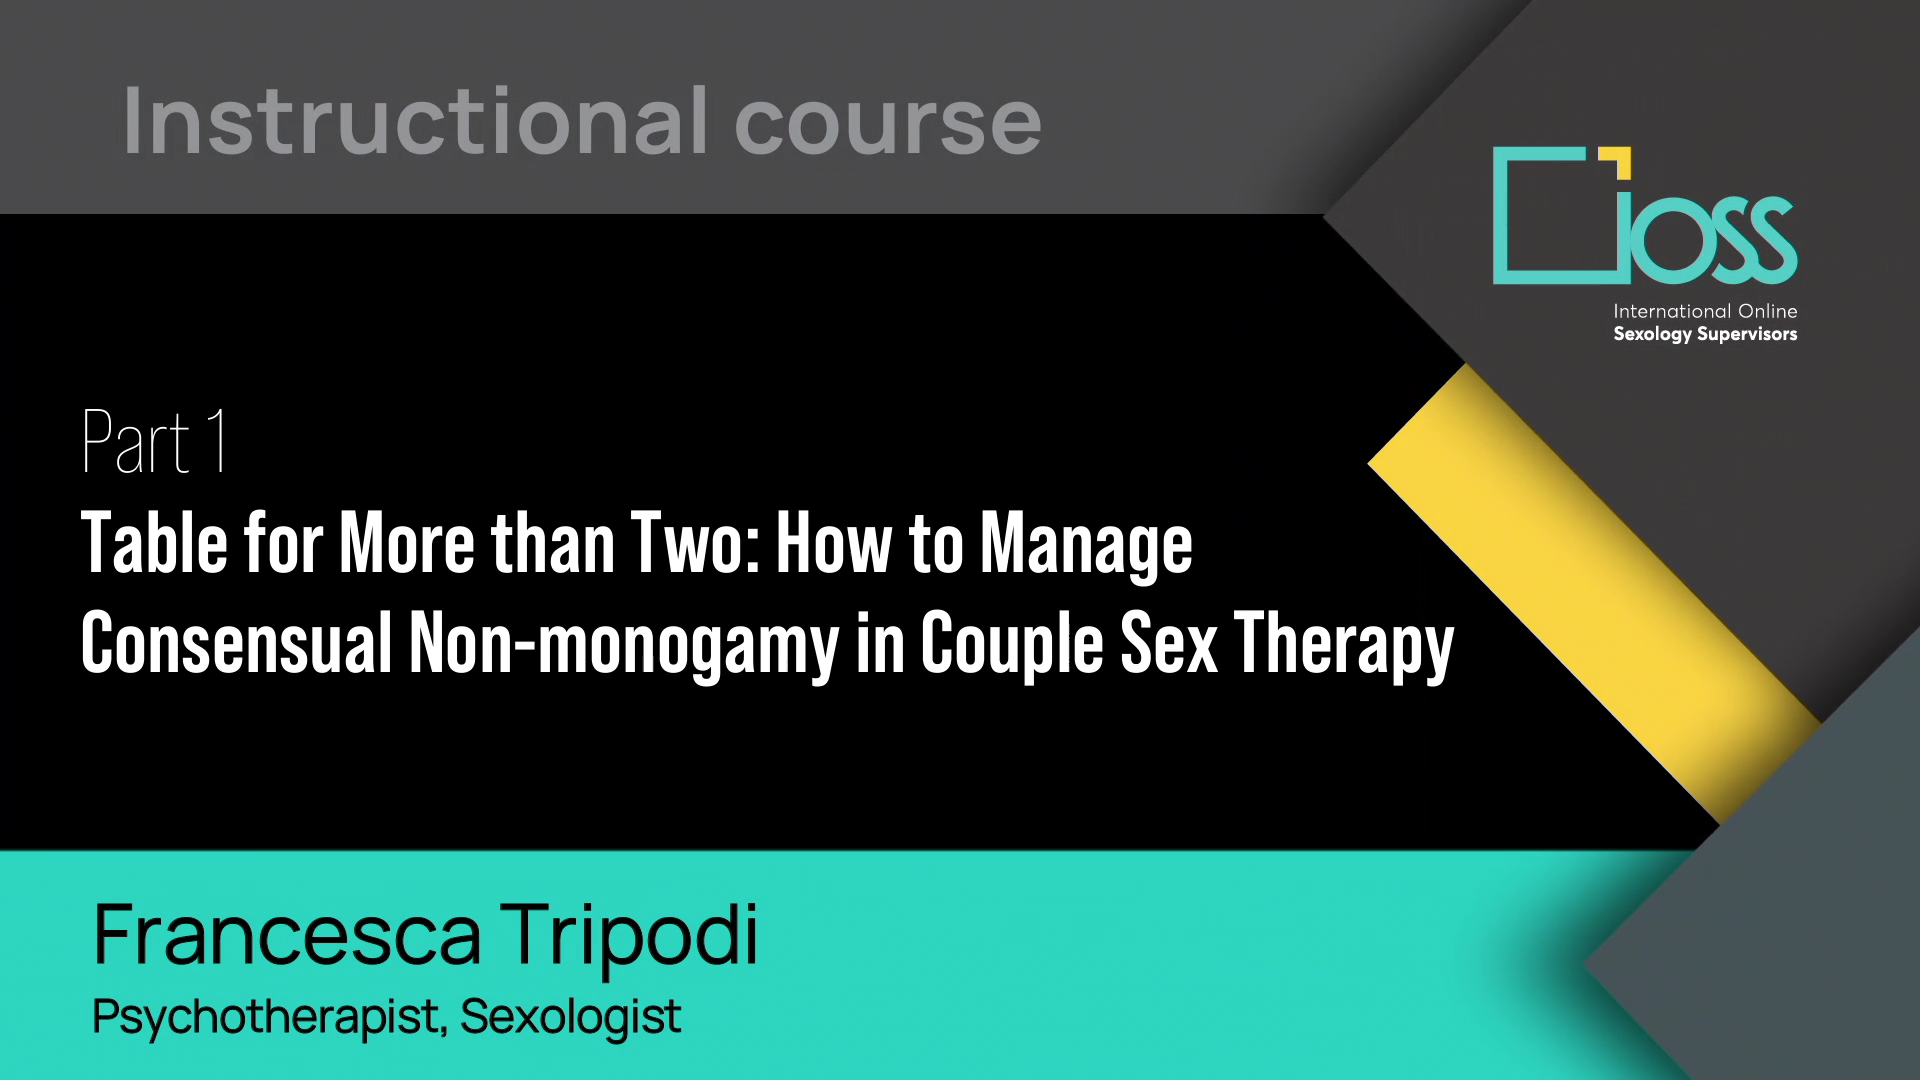 Part 1 Table for More than Two: How to Manage Consensual Non-monogamy in Couple Sex Therapy (Part 1 & 2)